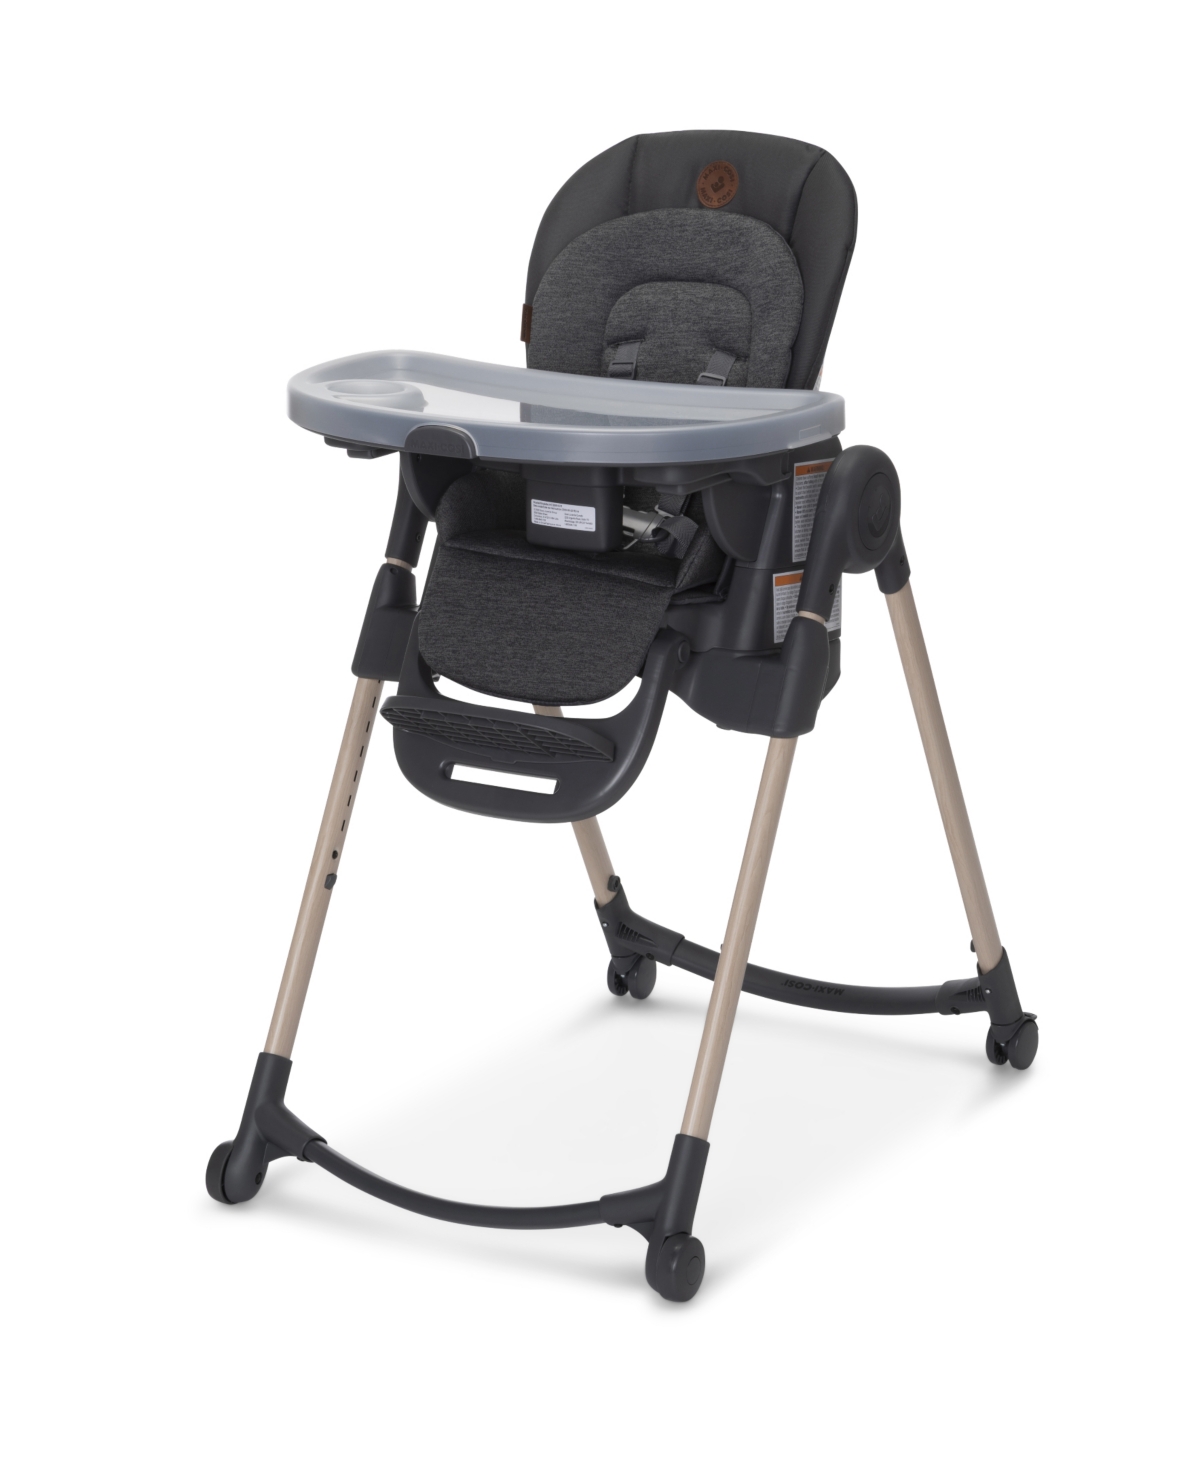 Maxi-cosi Baby Boys Or Baby Girls Minla 6-in-1 Adjustable High Chair In Classic Graphite